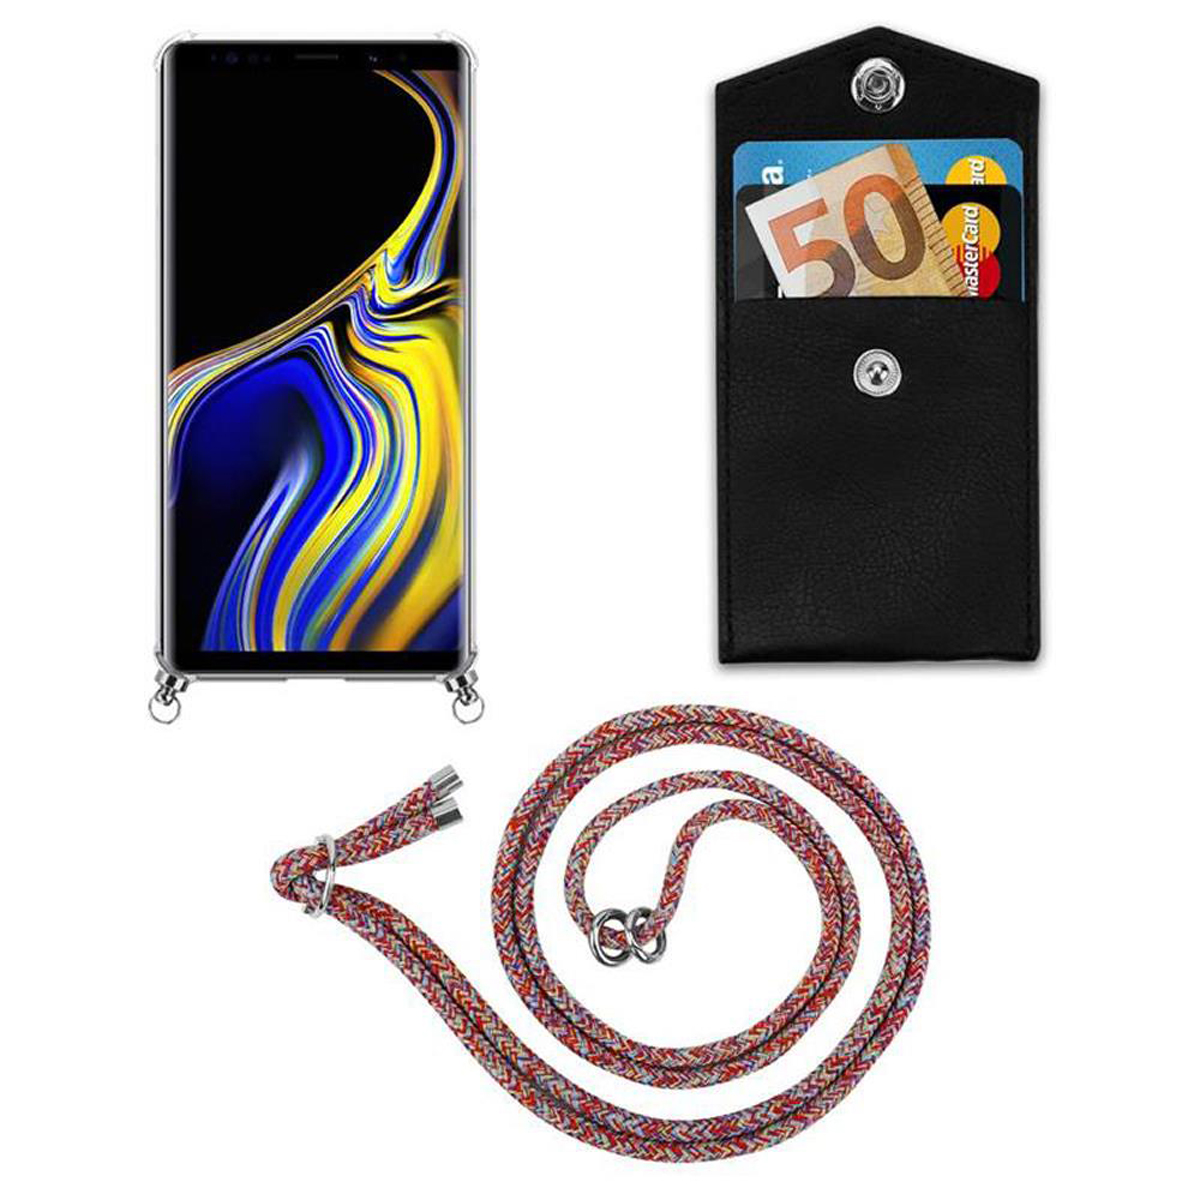 Backcover, PARROT Galaxy NOTE Band COLORFUL Kette mit und Hülle, Silber 9, CADORABO Handy Ringen, abnehmbarer Kordel Samsung,